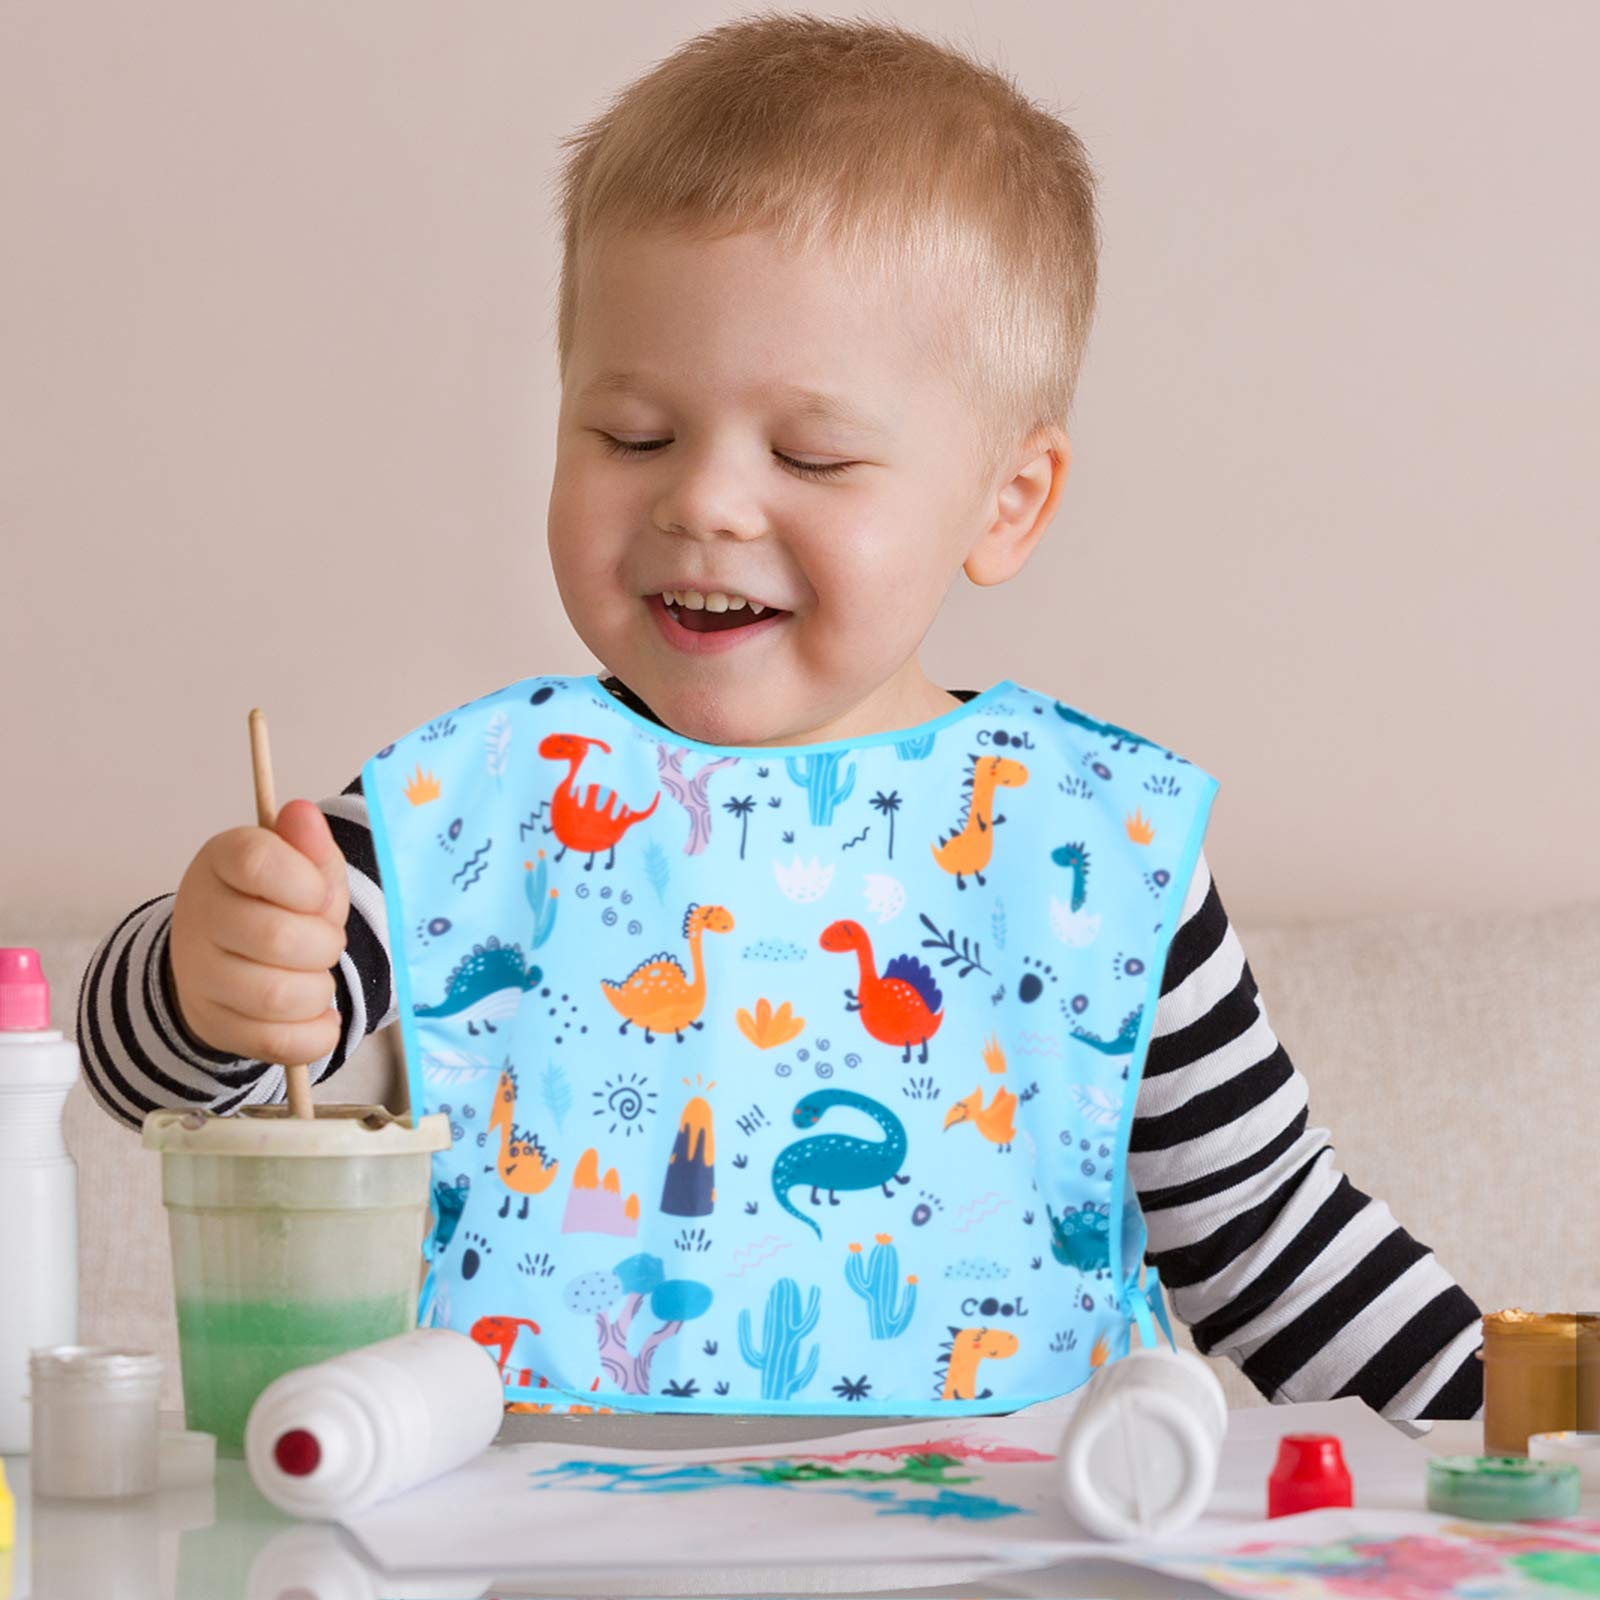 Kids Art Smock, Waterproof Artist Painting Aprons, Sleeveless Children Art Smocks with Pockets for Age 2-7 Years